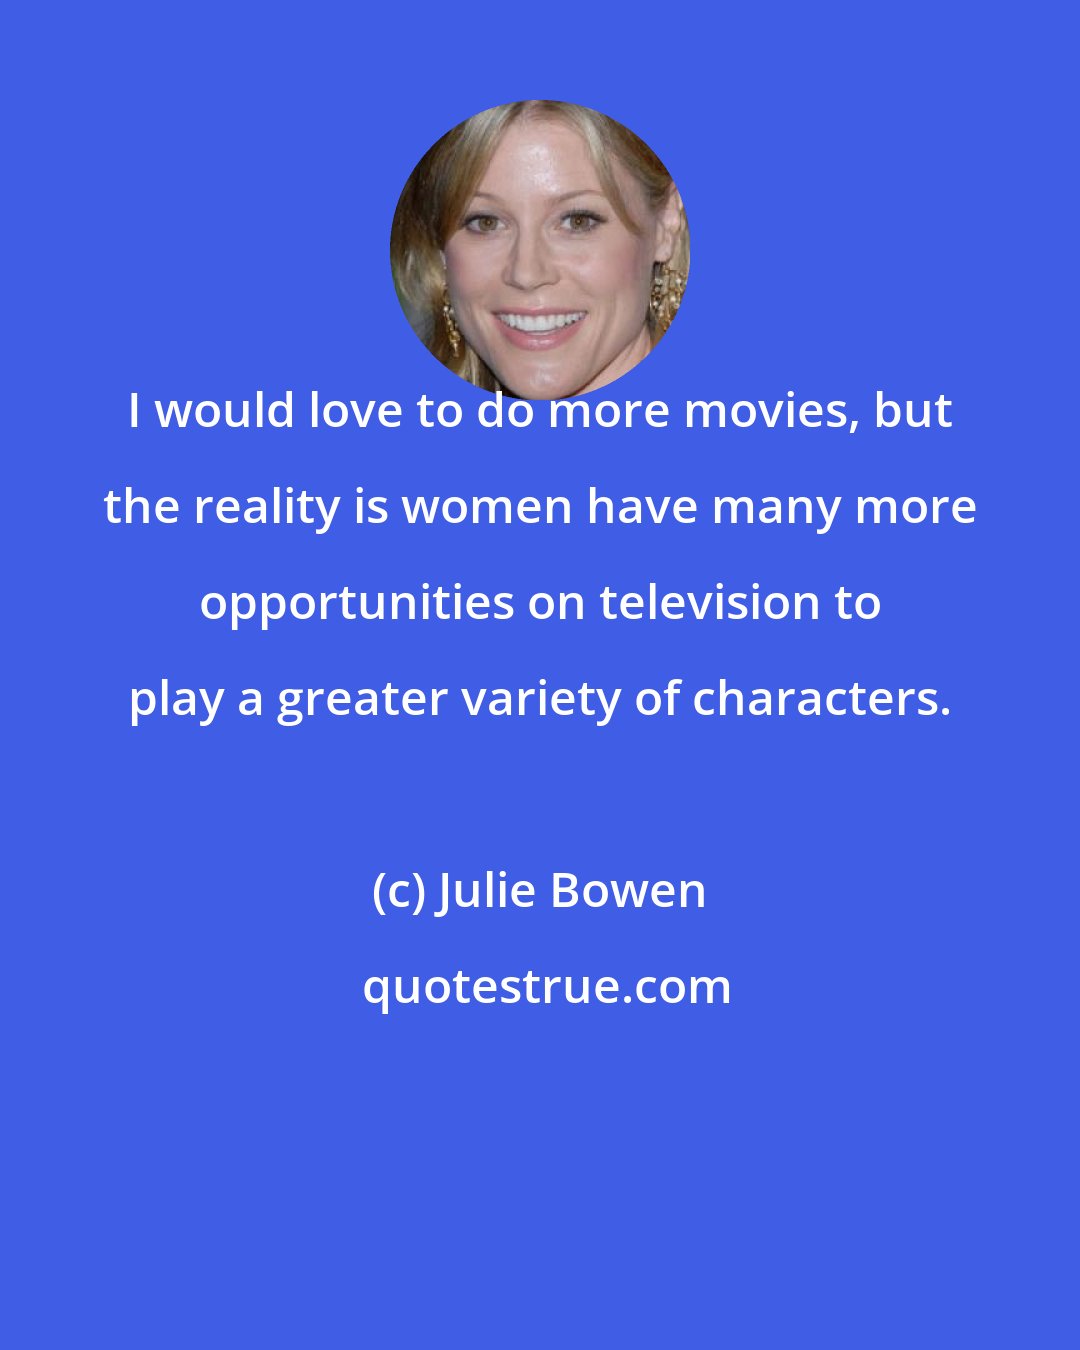 Julie Bowen: I would love to do more movies, but the reality is women have many more opportunities on television to play a greater variety of characters.